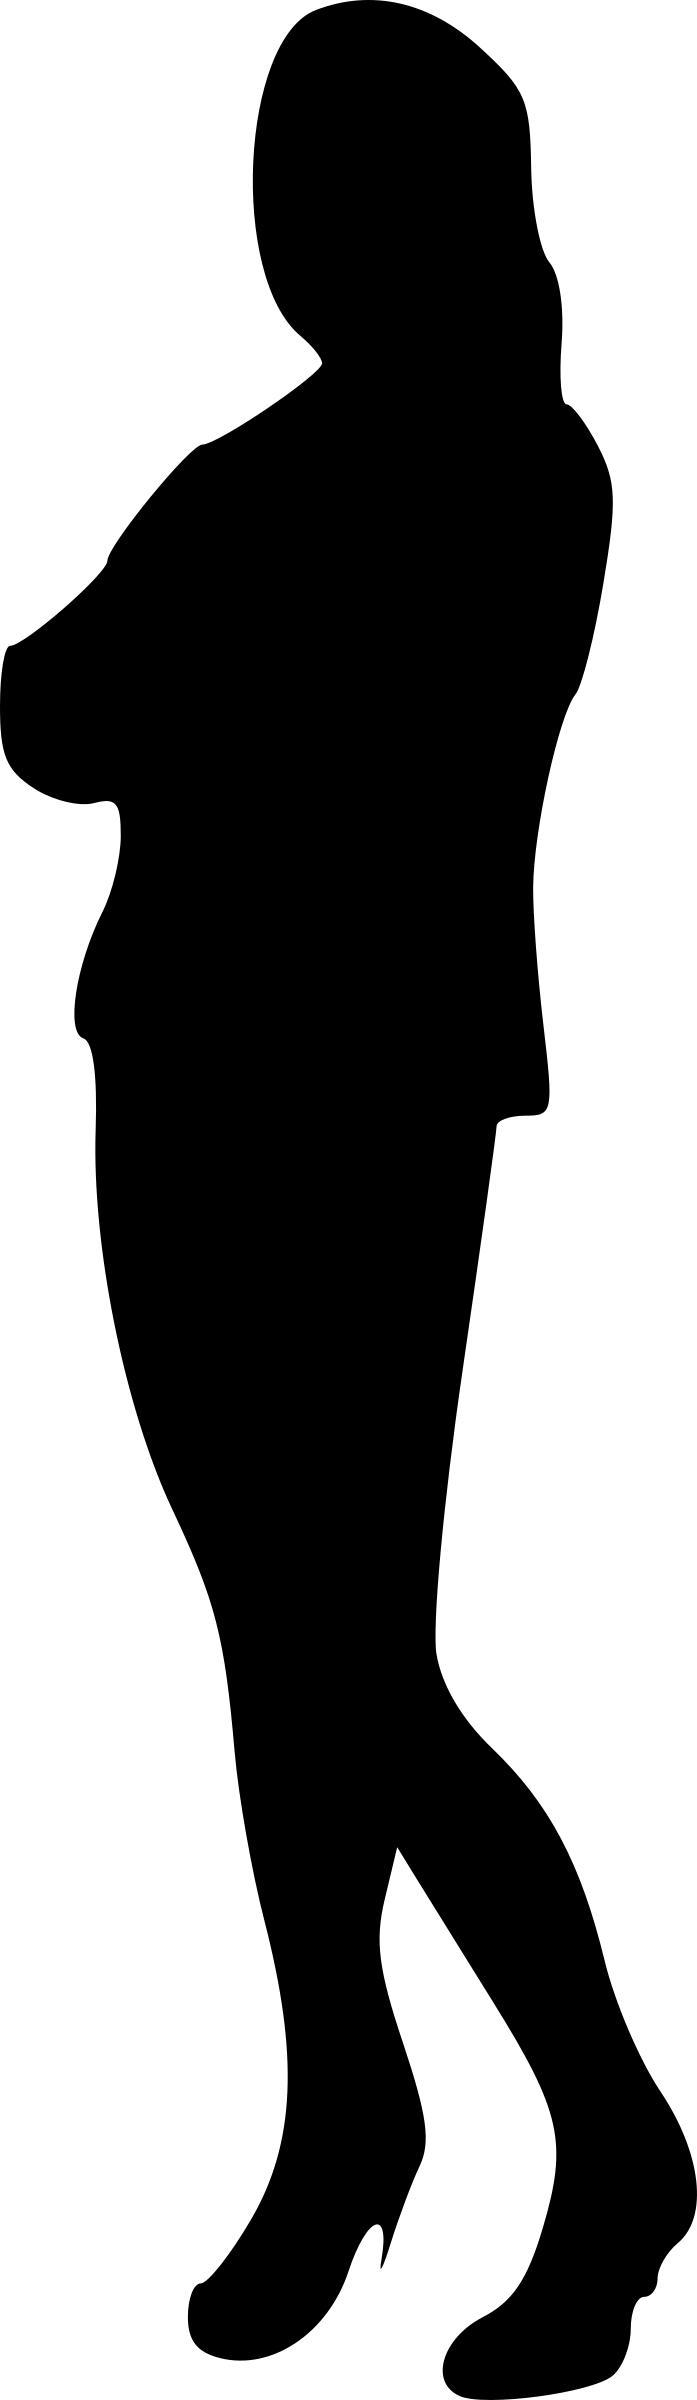 Crossed arms png transparent